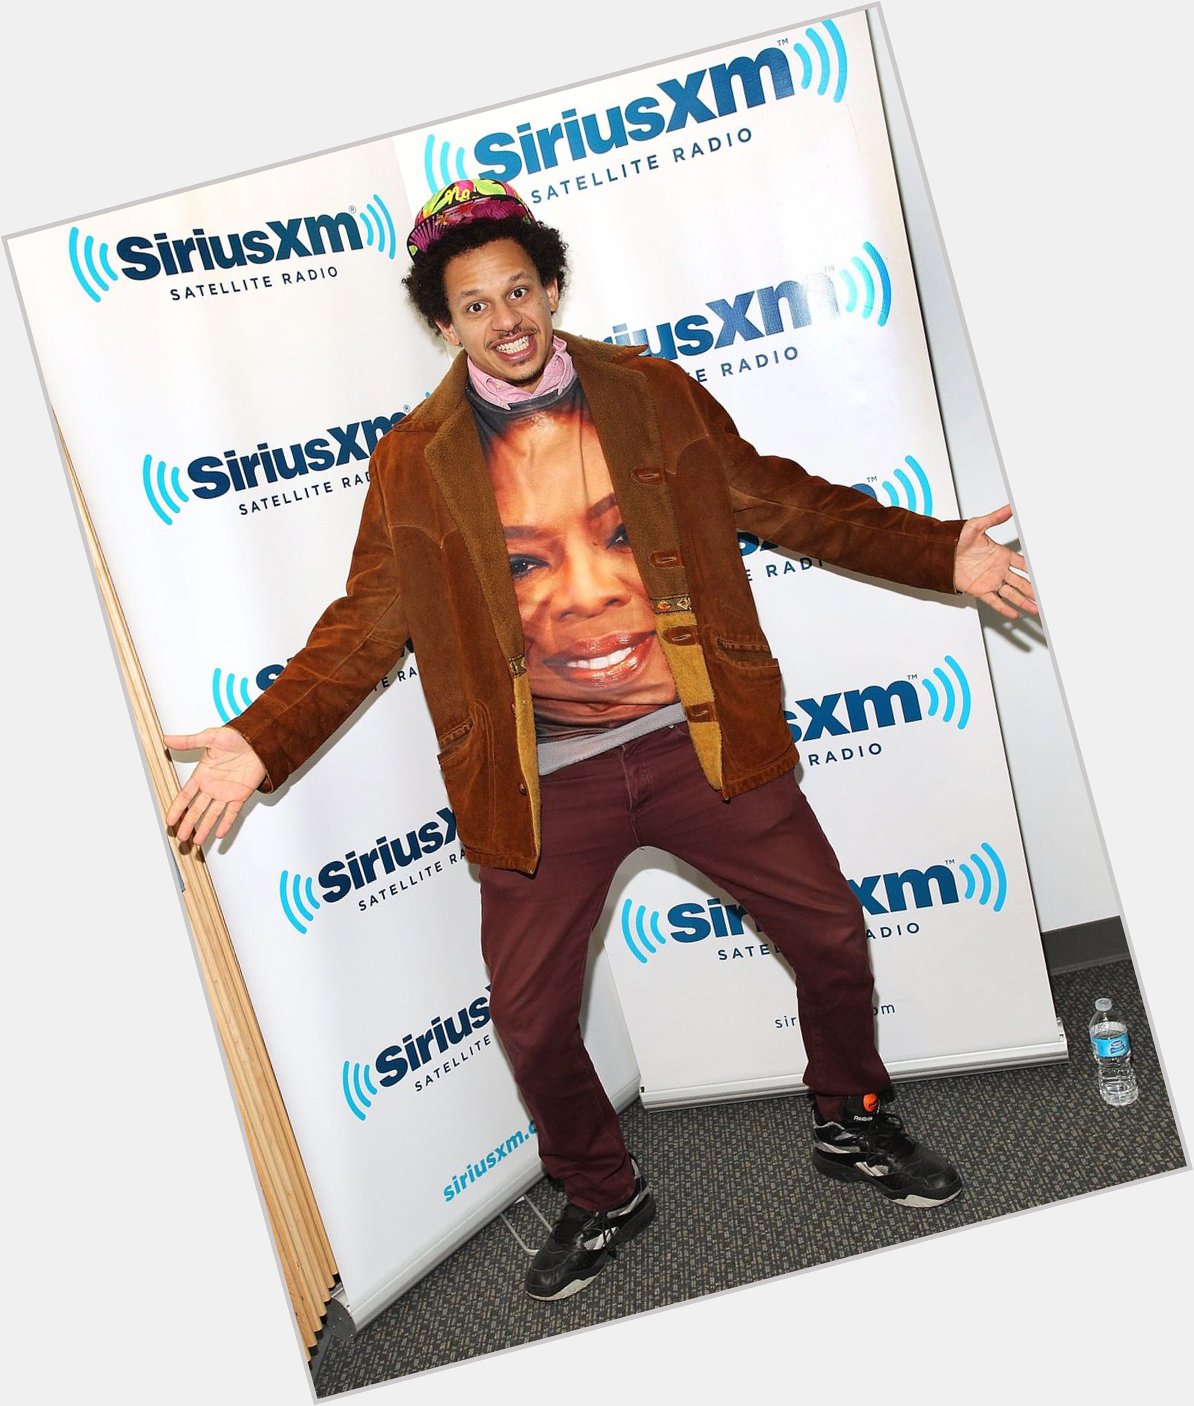 Happy birthday eric andre i hope you have a fulfilling easter 